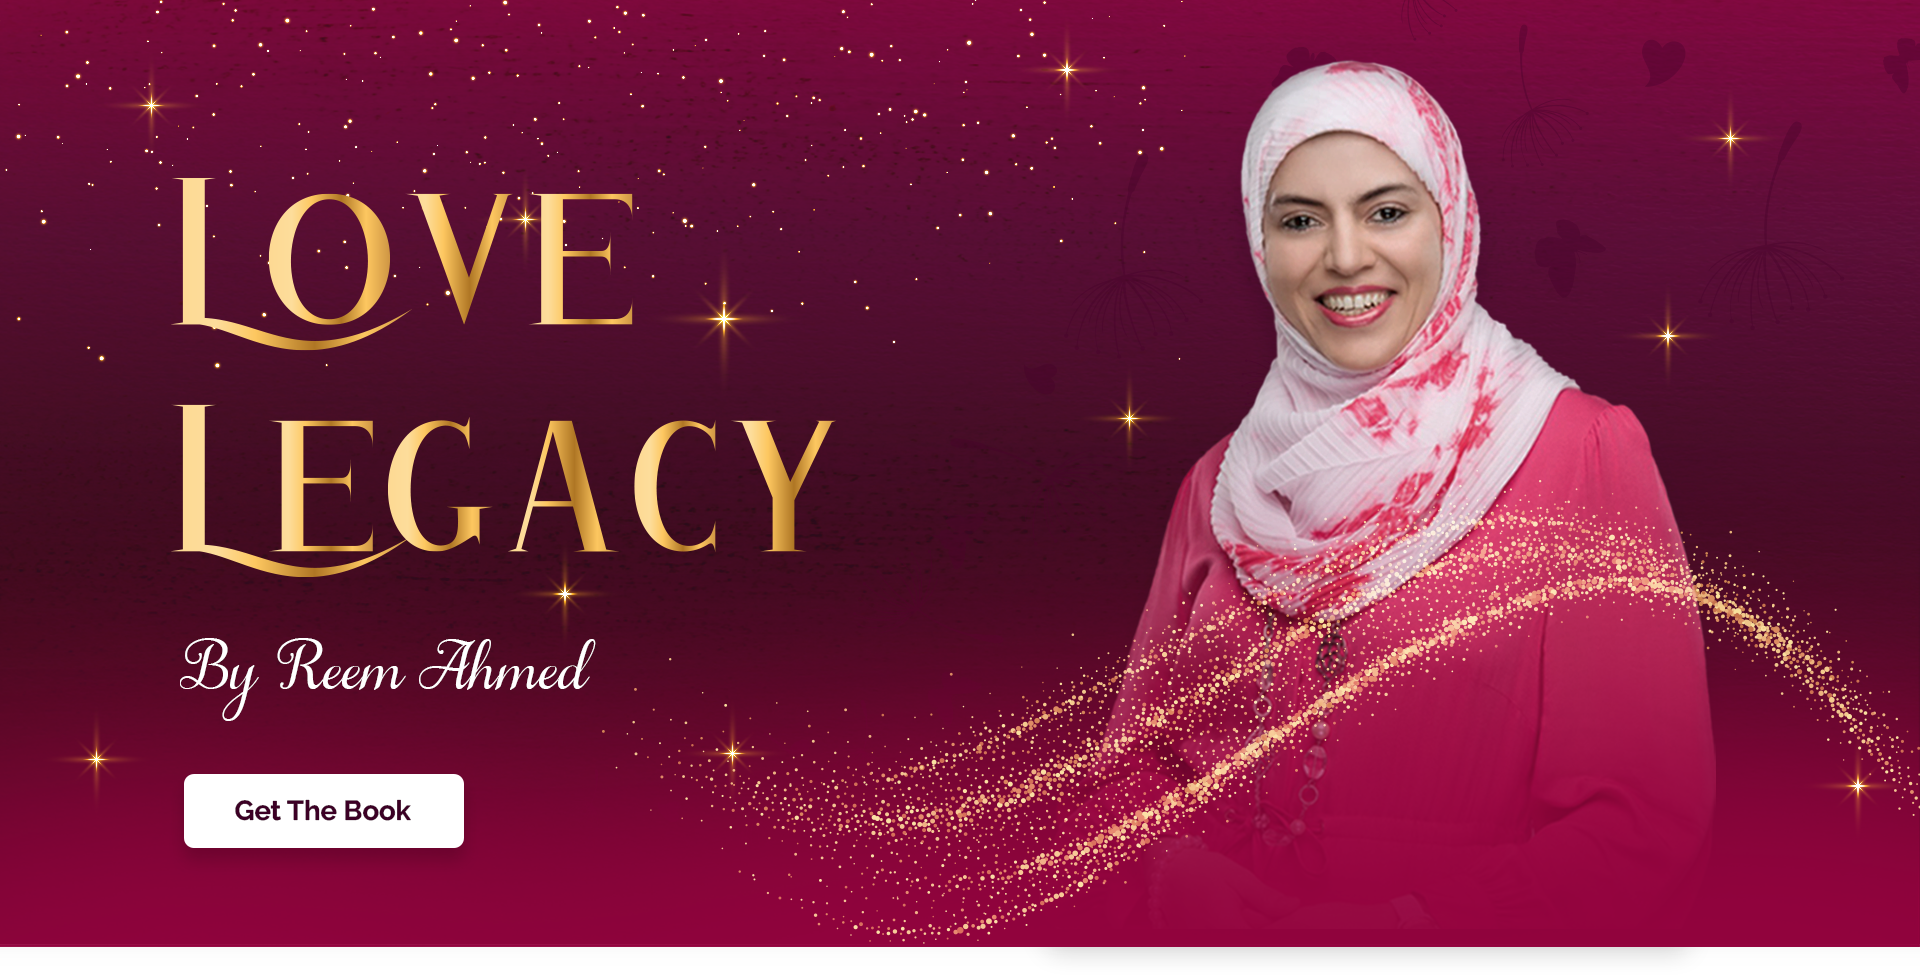 Love Legacy eBook, Audio Book and Video Book by Reem Ahmed